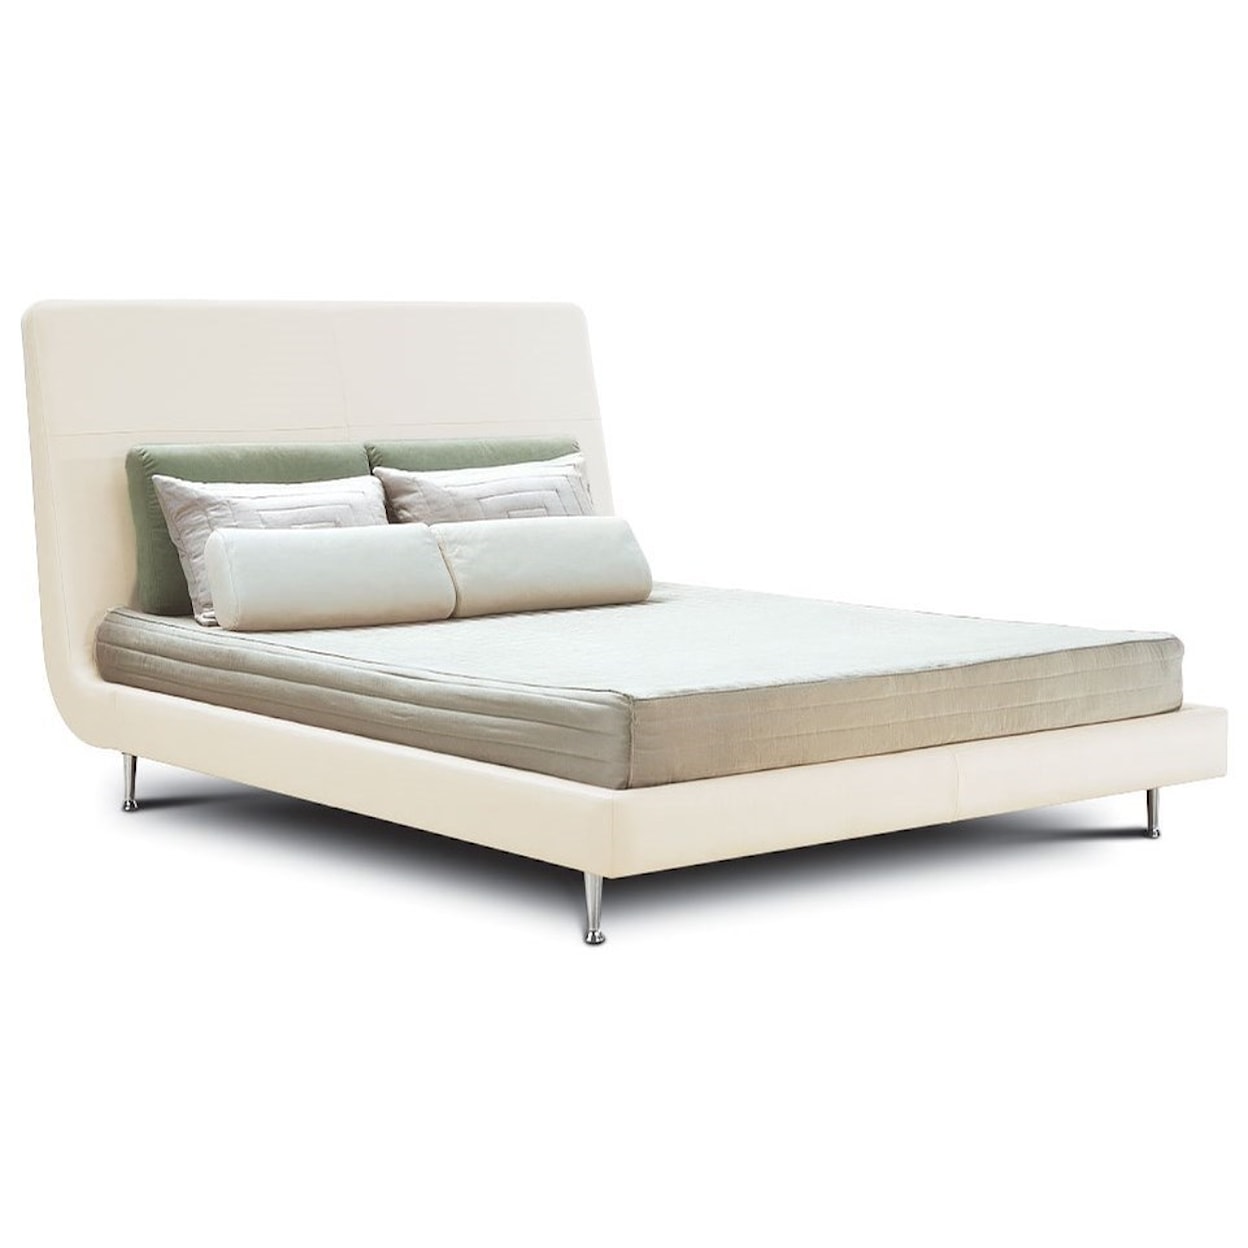 American Leather Menlo Park Bed Full Upholstered Bed